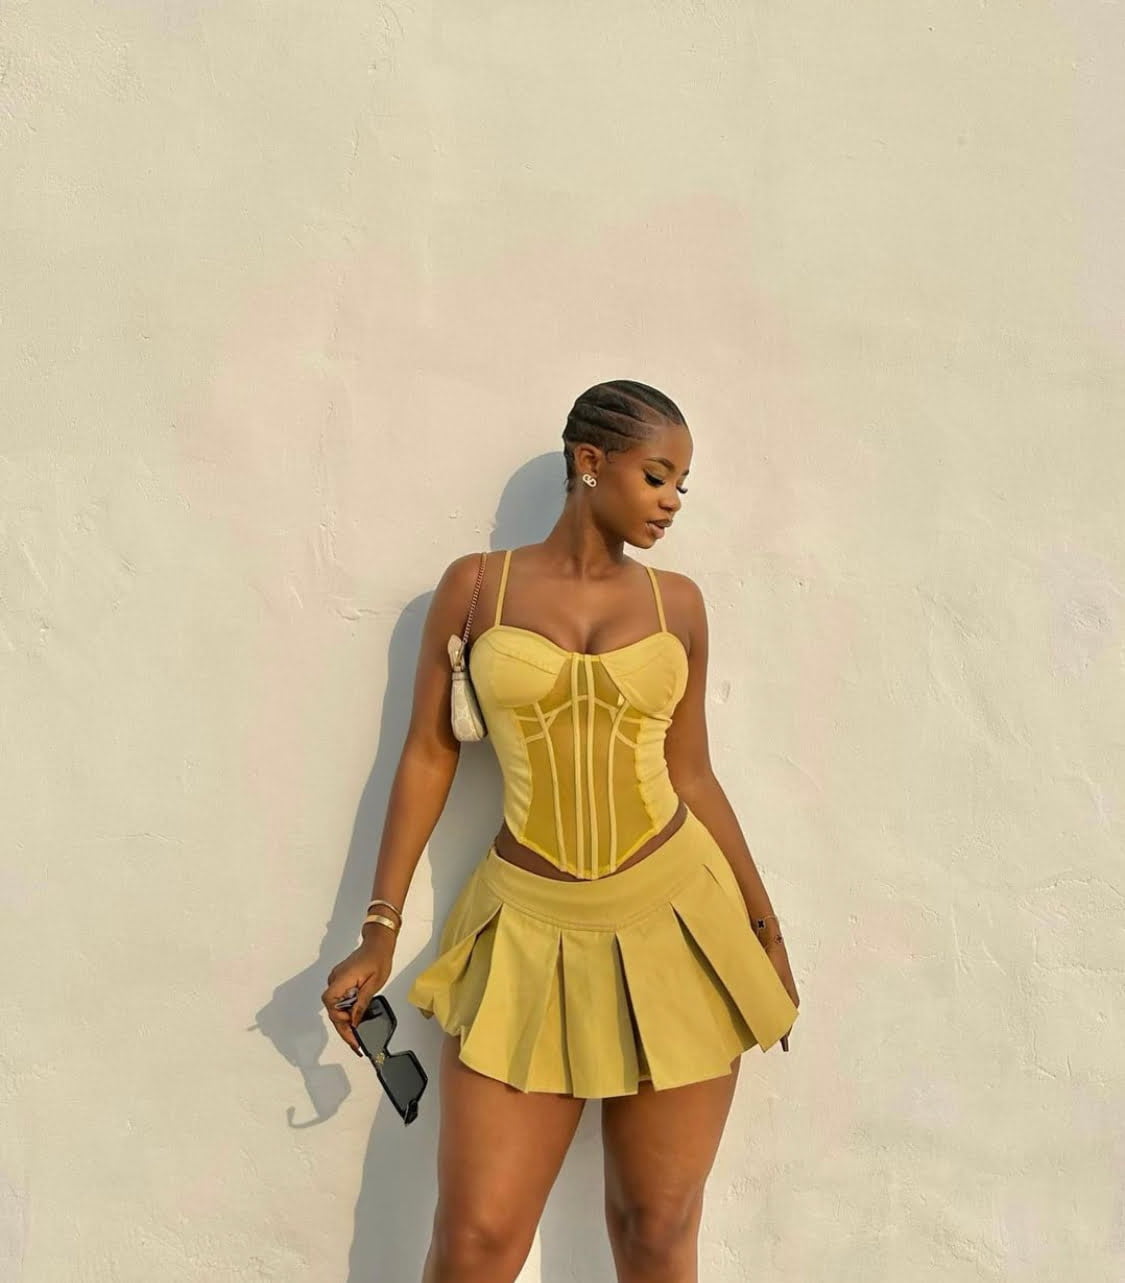 Priscilla Ojo in a show stopping two piece outfit that consists of a corset top and a pleated skirt.